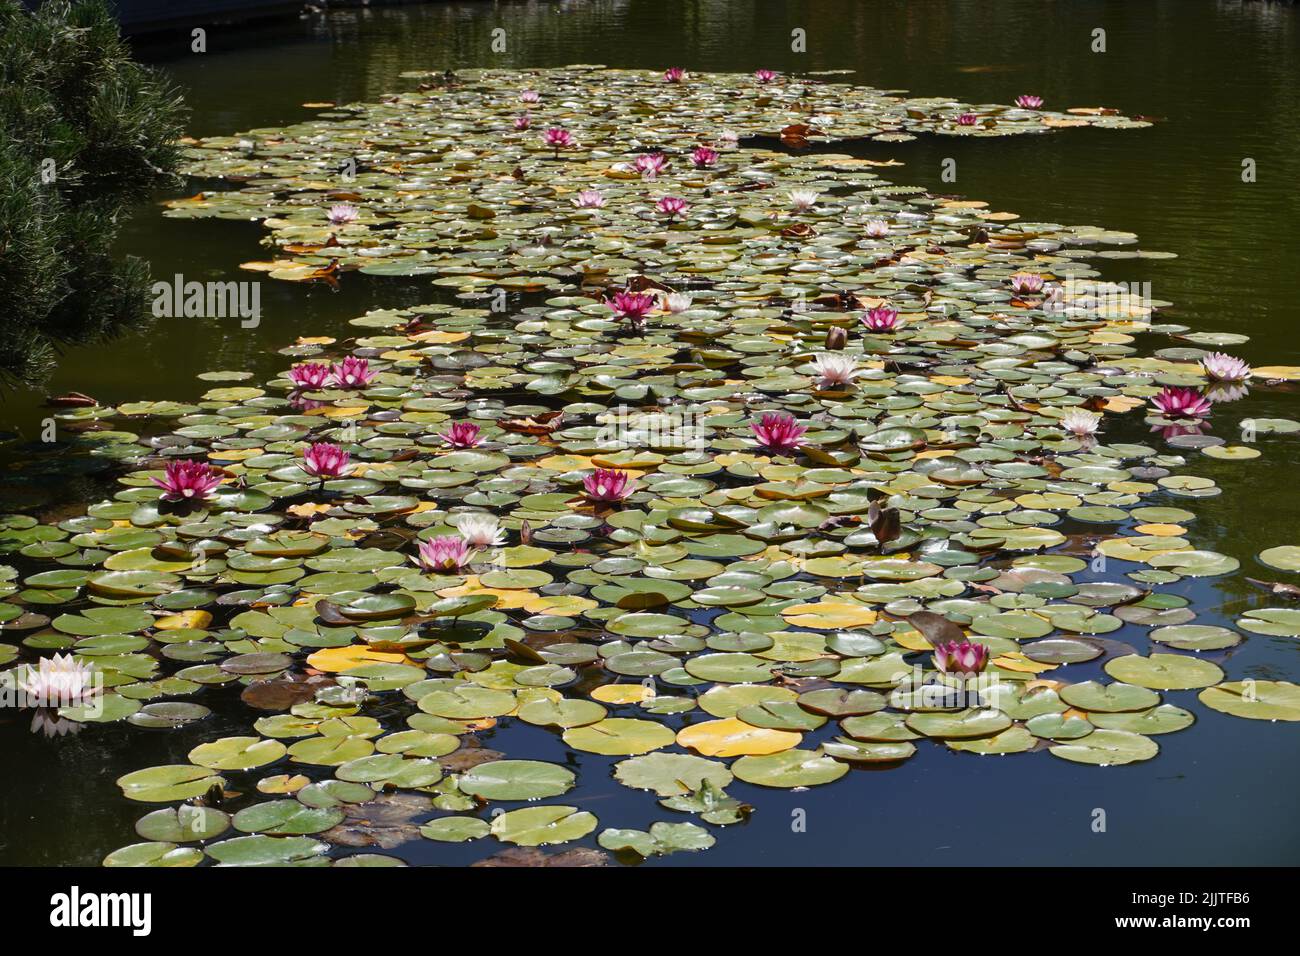 The water lilies on the pond Stock Photo